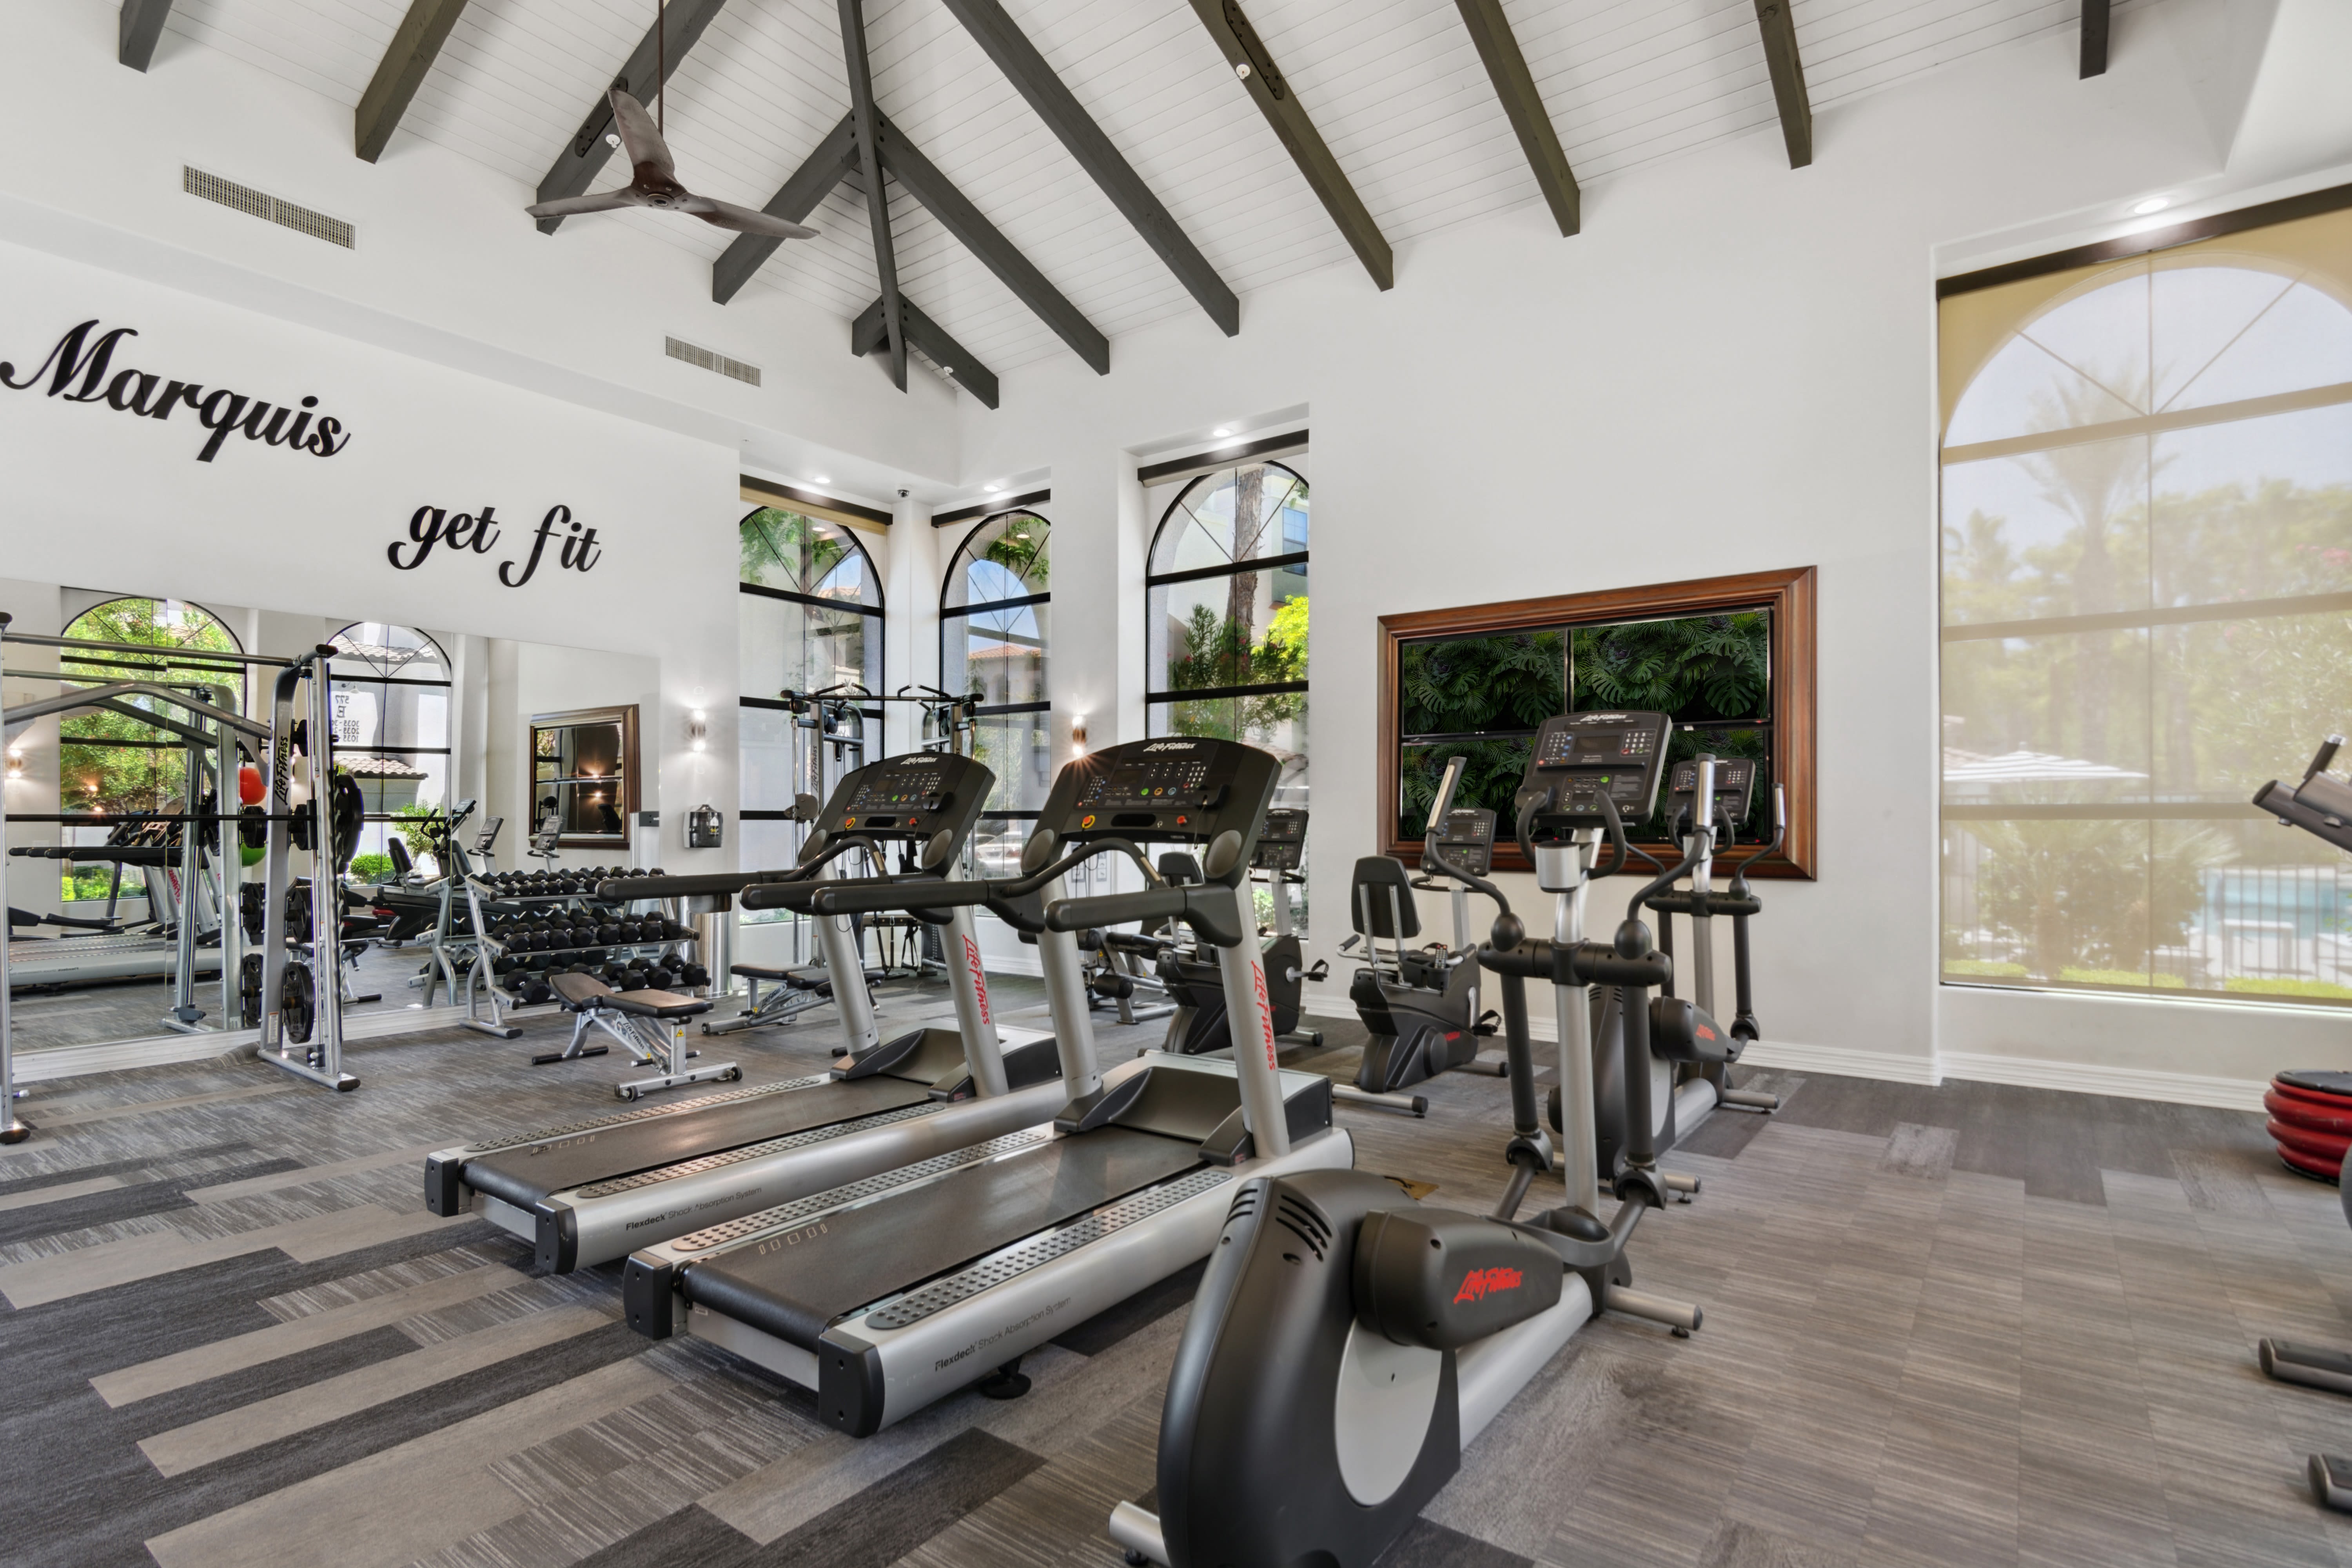 Huge fitness center at San Marquis in Tempe, Arizona